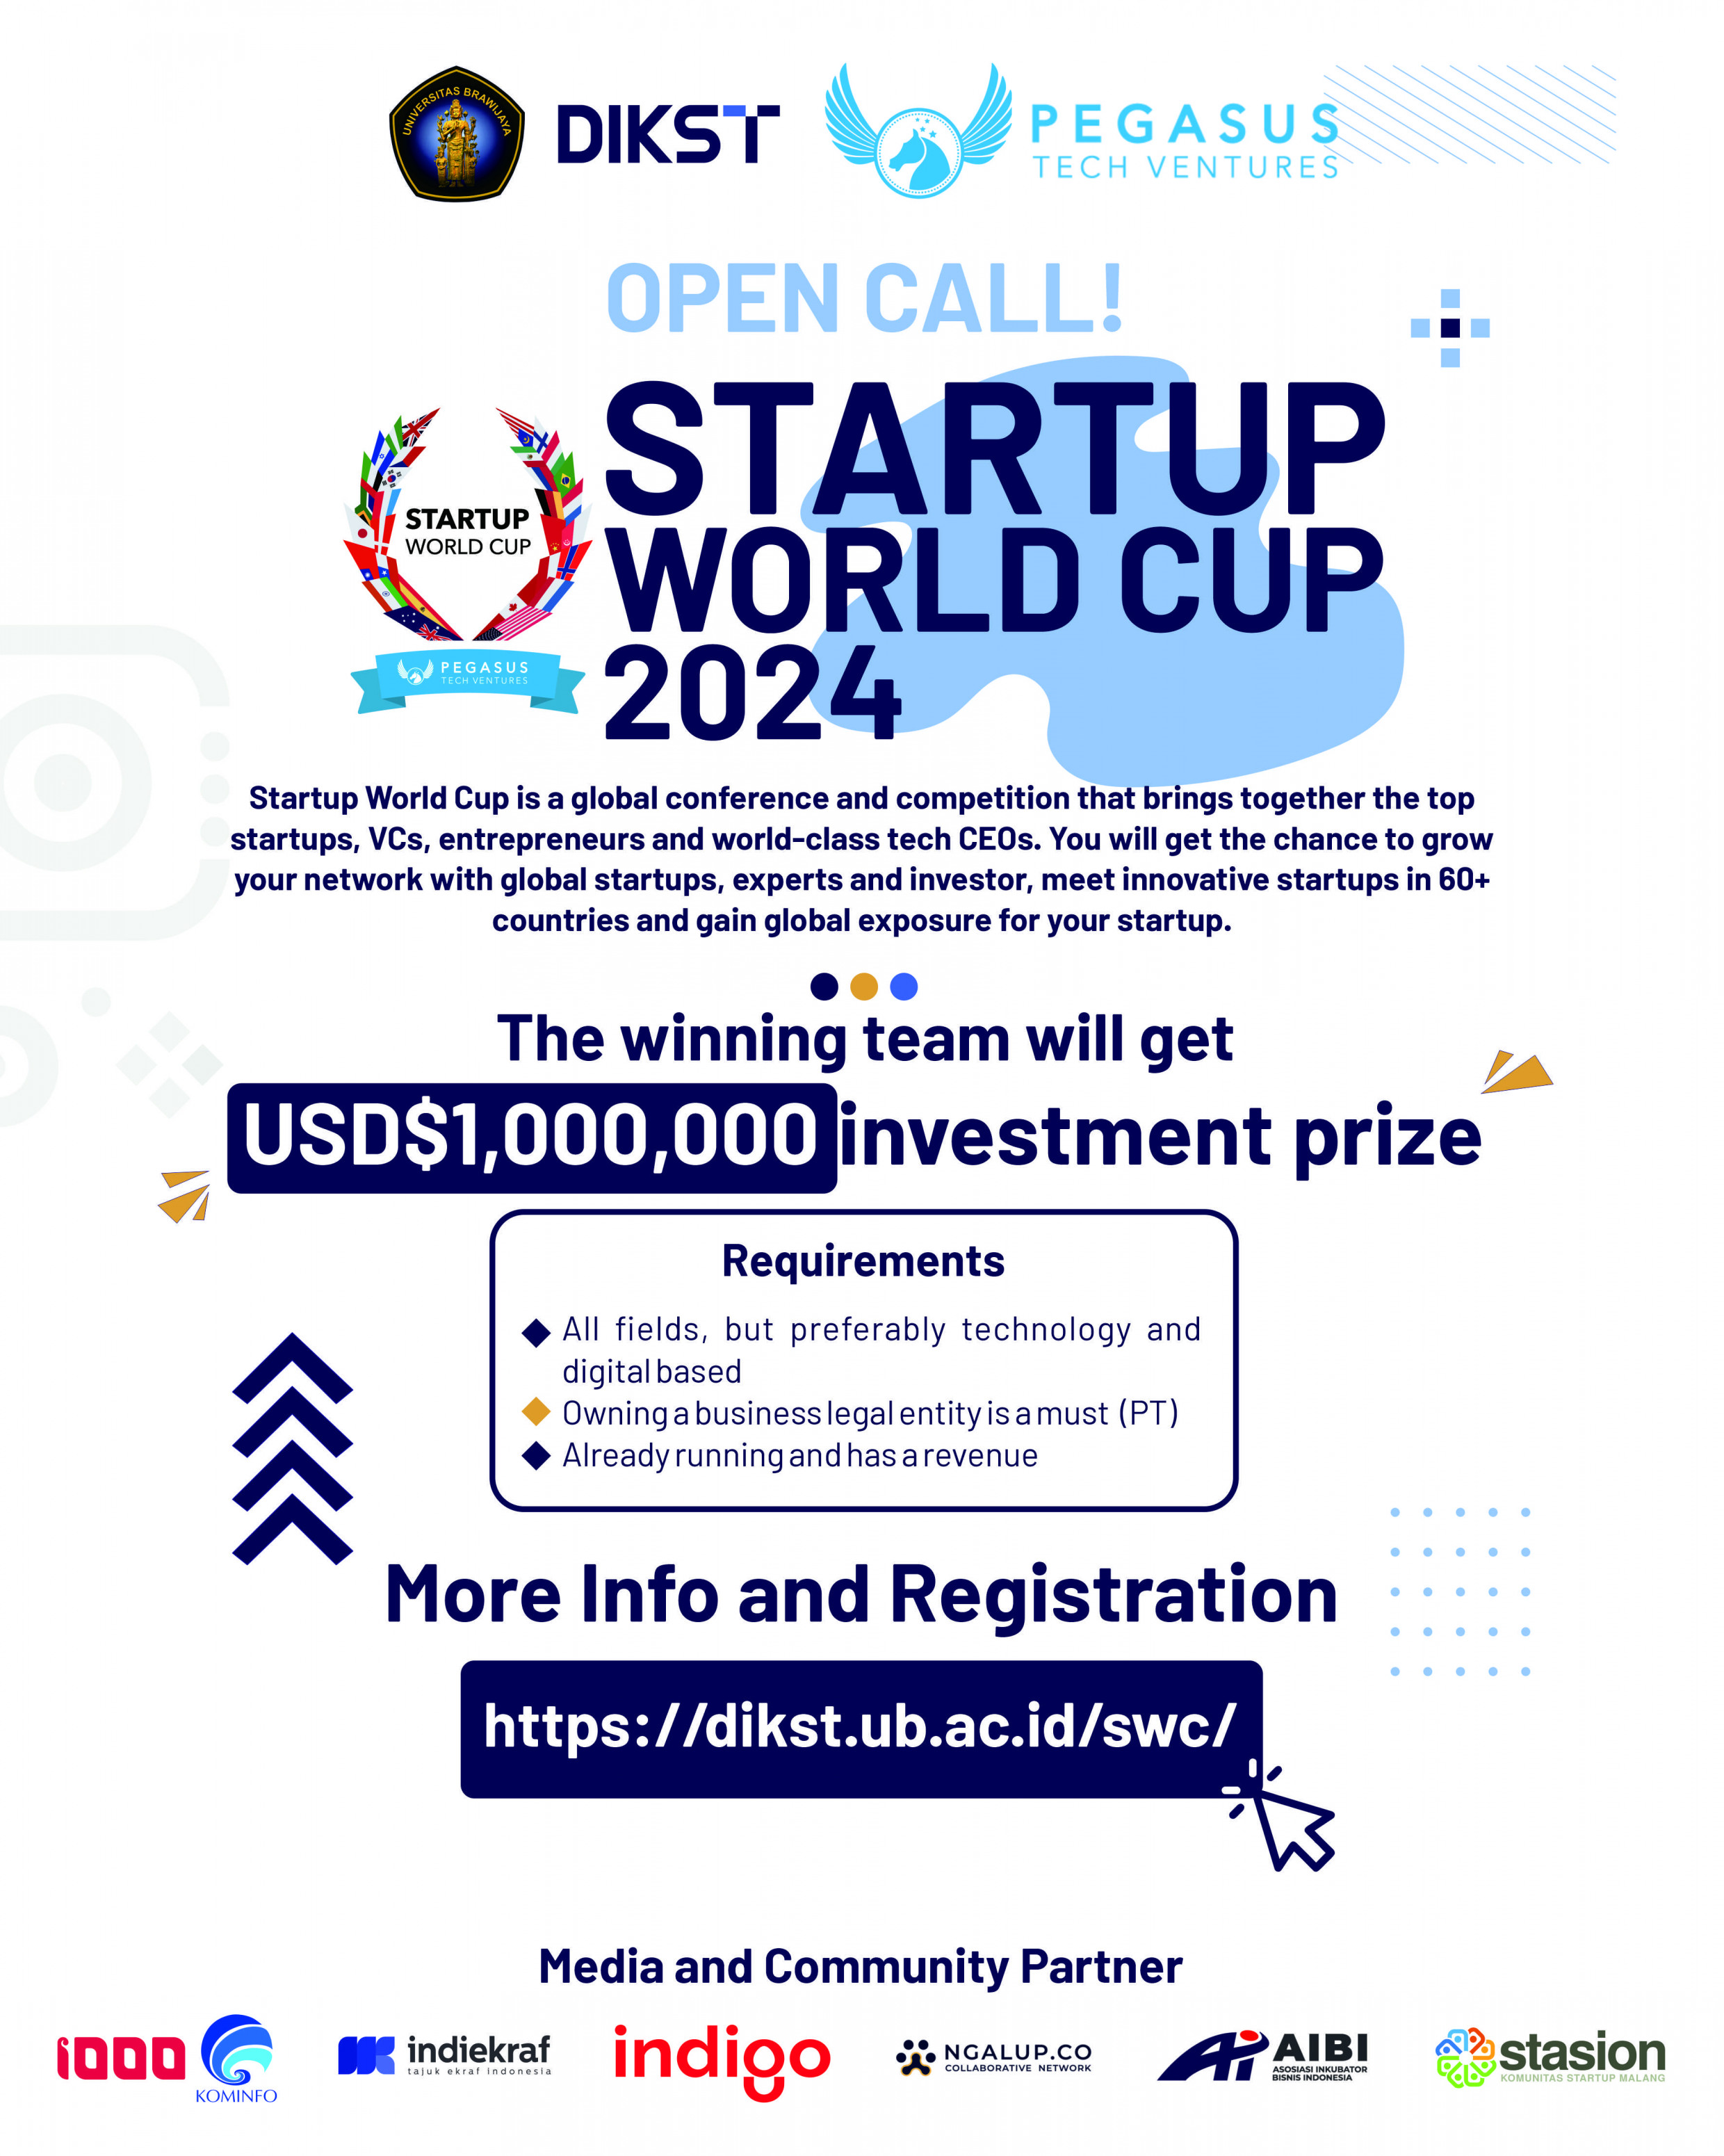 Startup World Cup 2024